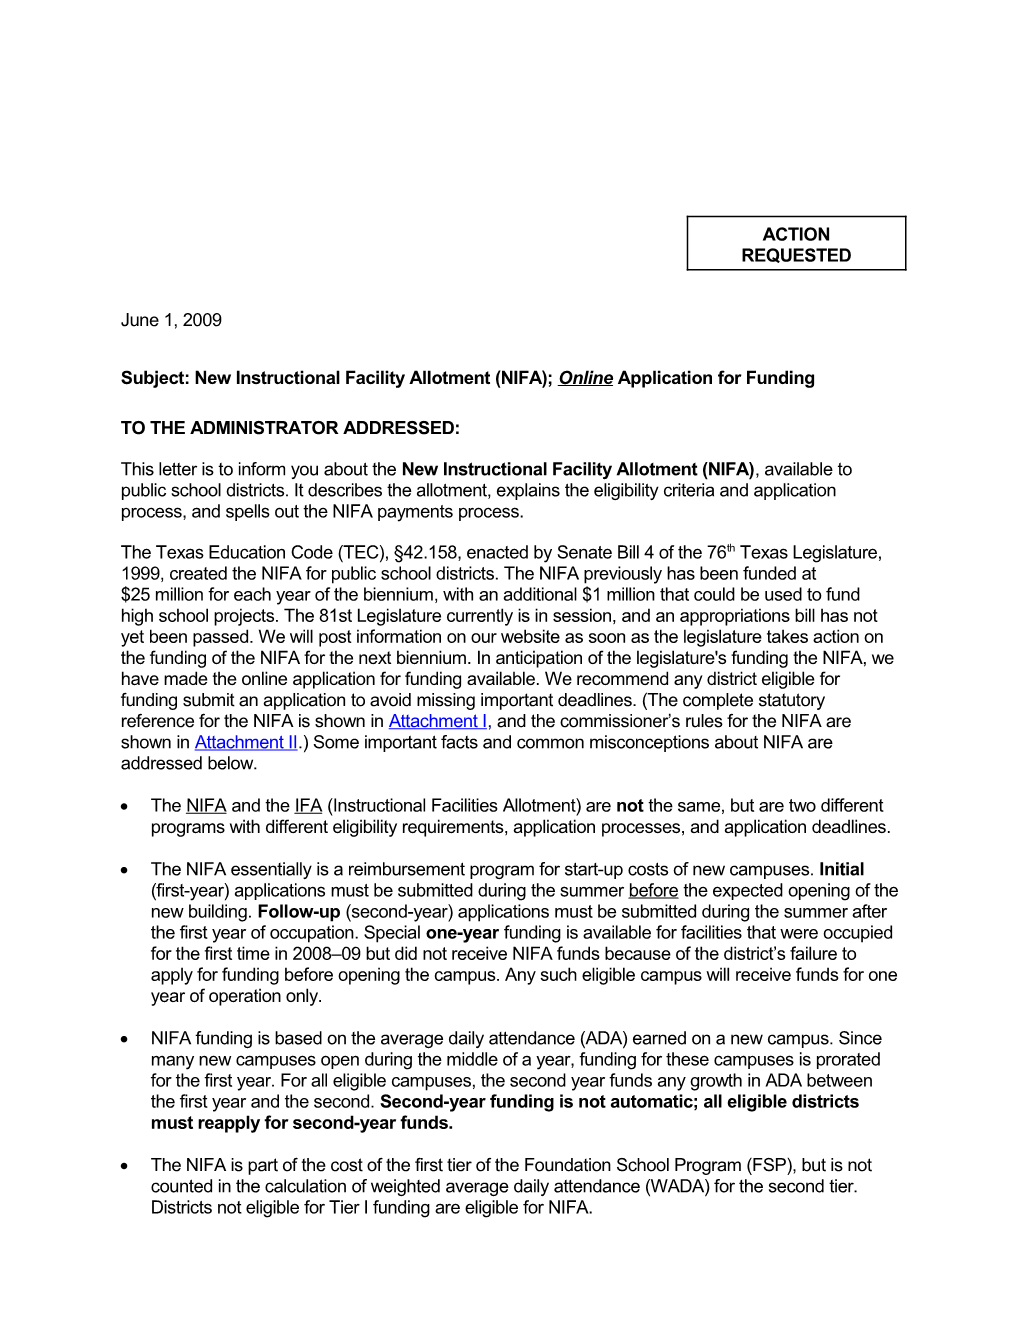 NIFA 2004-05 Cycle Open Letter